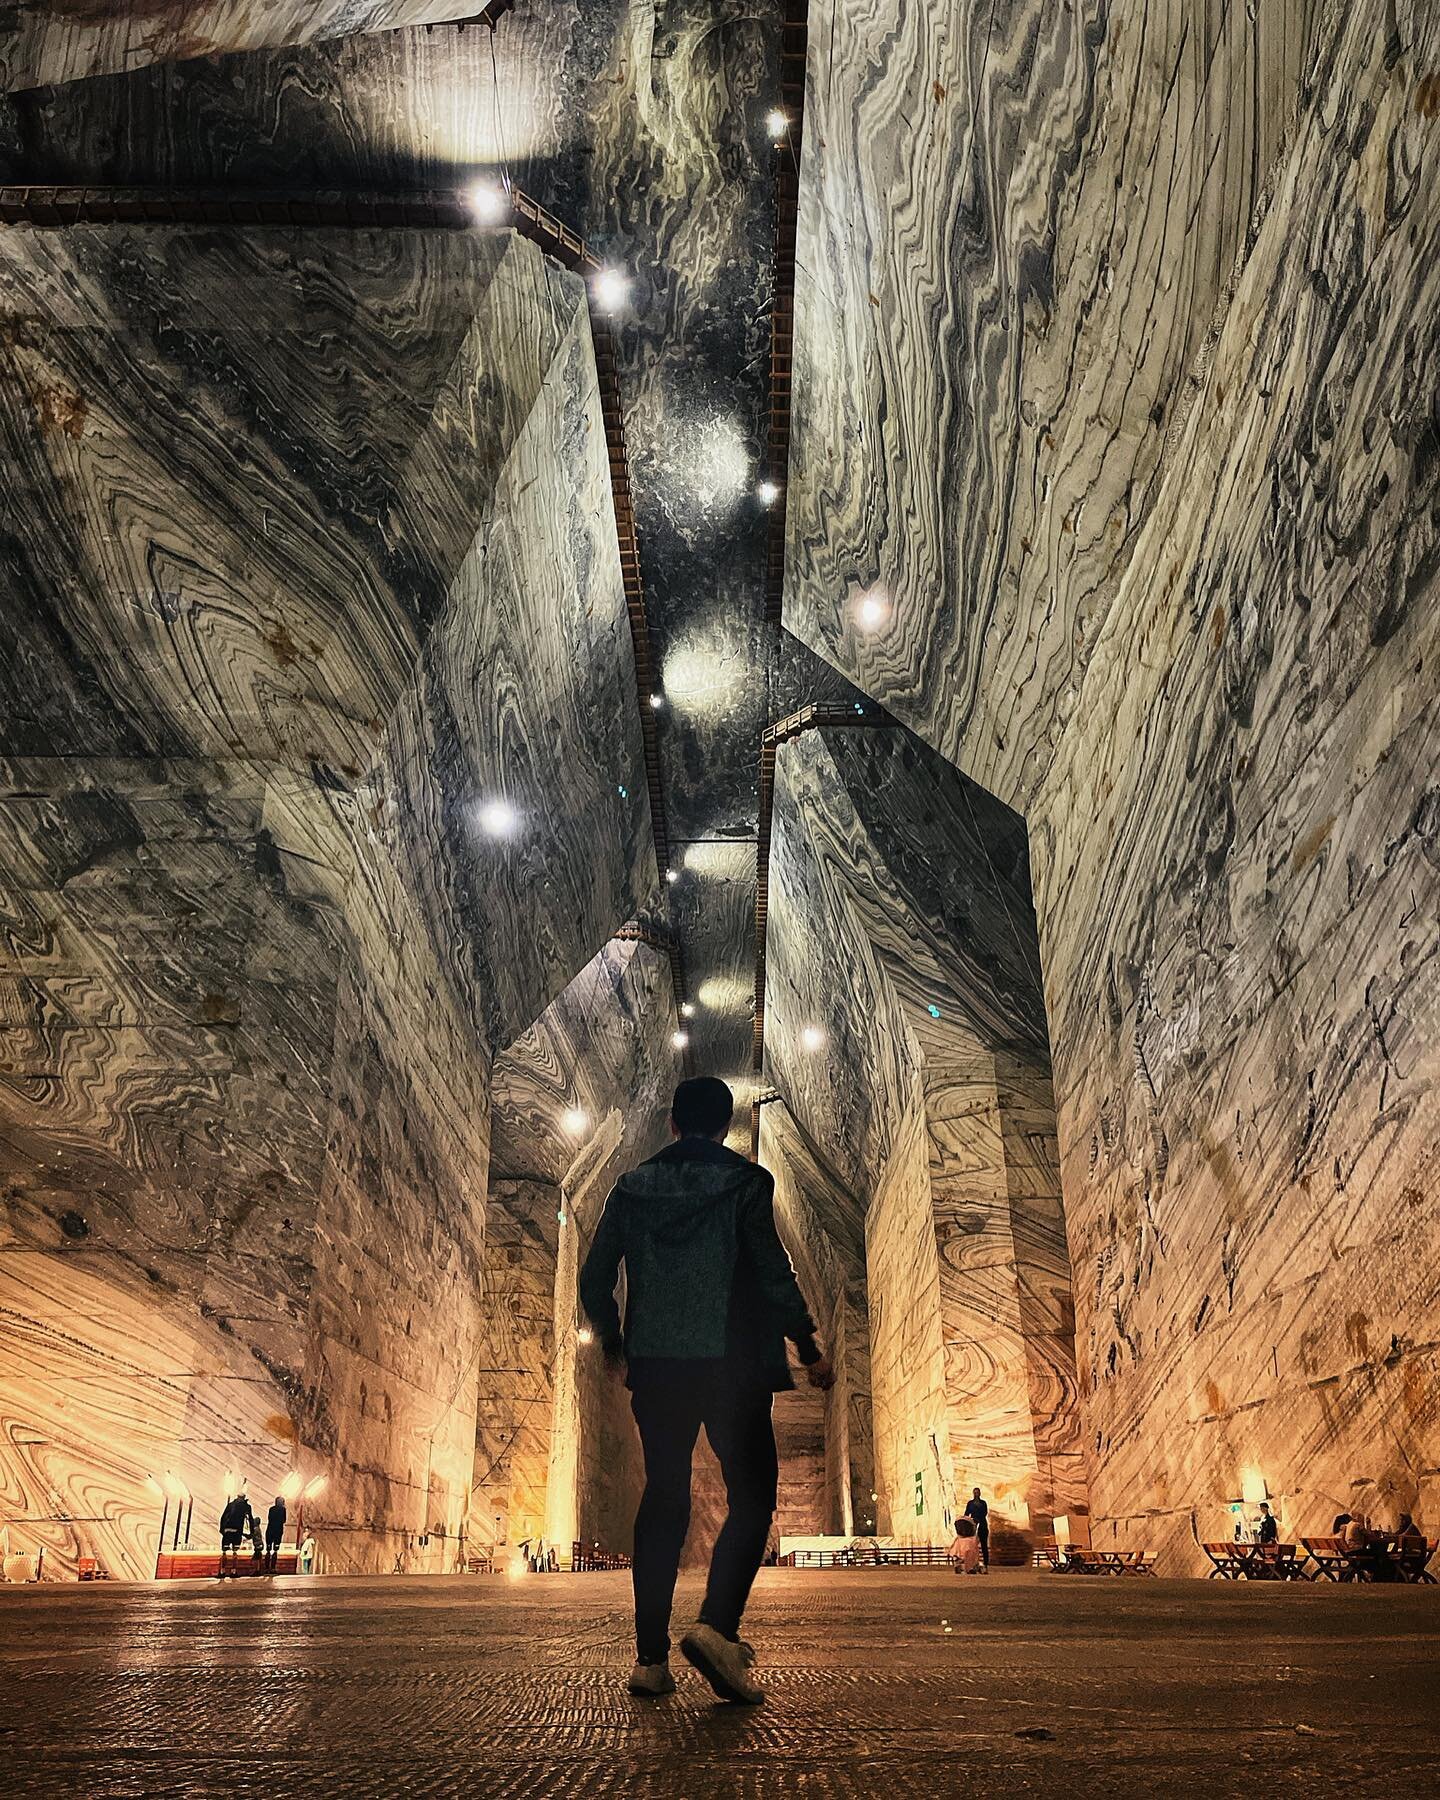 Feels like a video game mine level

&mdash;
Quite different from wieliczka too 

&mdash;
@here.comes.adrian 

#slanicprahova #saltmine #saltmines #undergroundmine #undergroundmining #subterranean #subterraneo #subterr&aacute;neo #underground #marbled